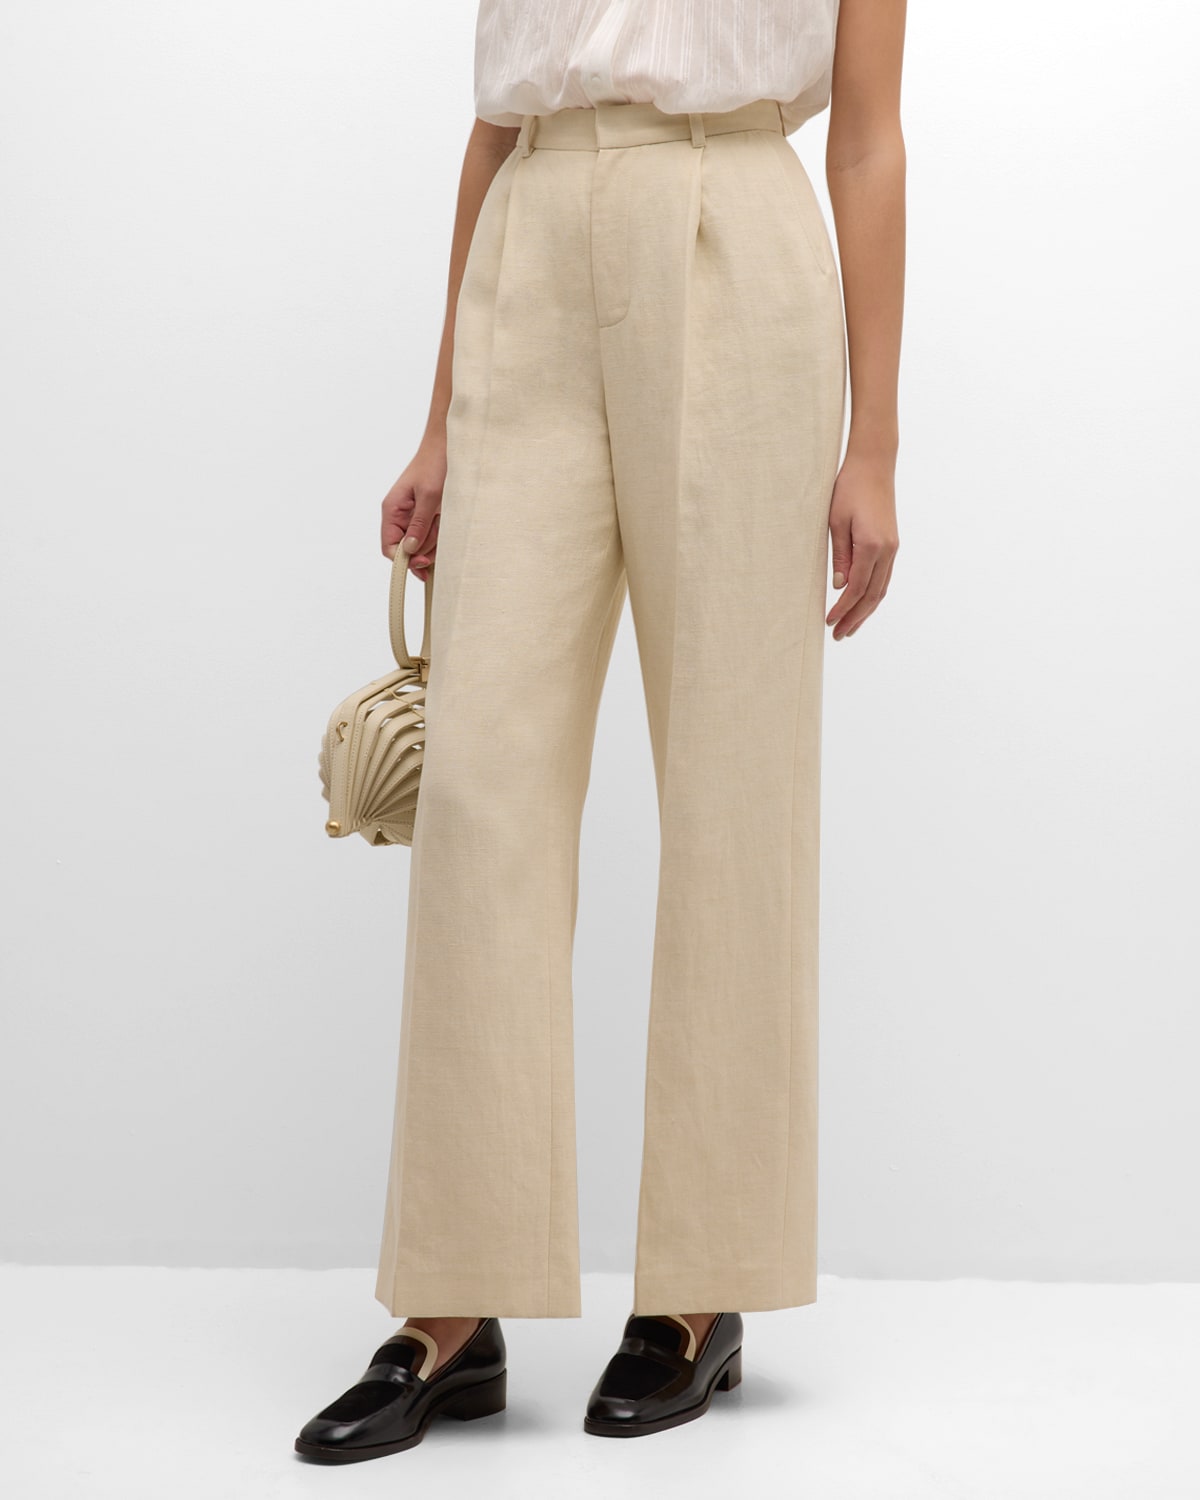 Vanessa Bruno Cyrano Pleated High-rise Cotton-linen Pants In Beige Ivoire